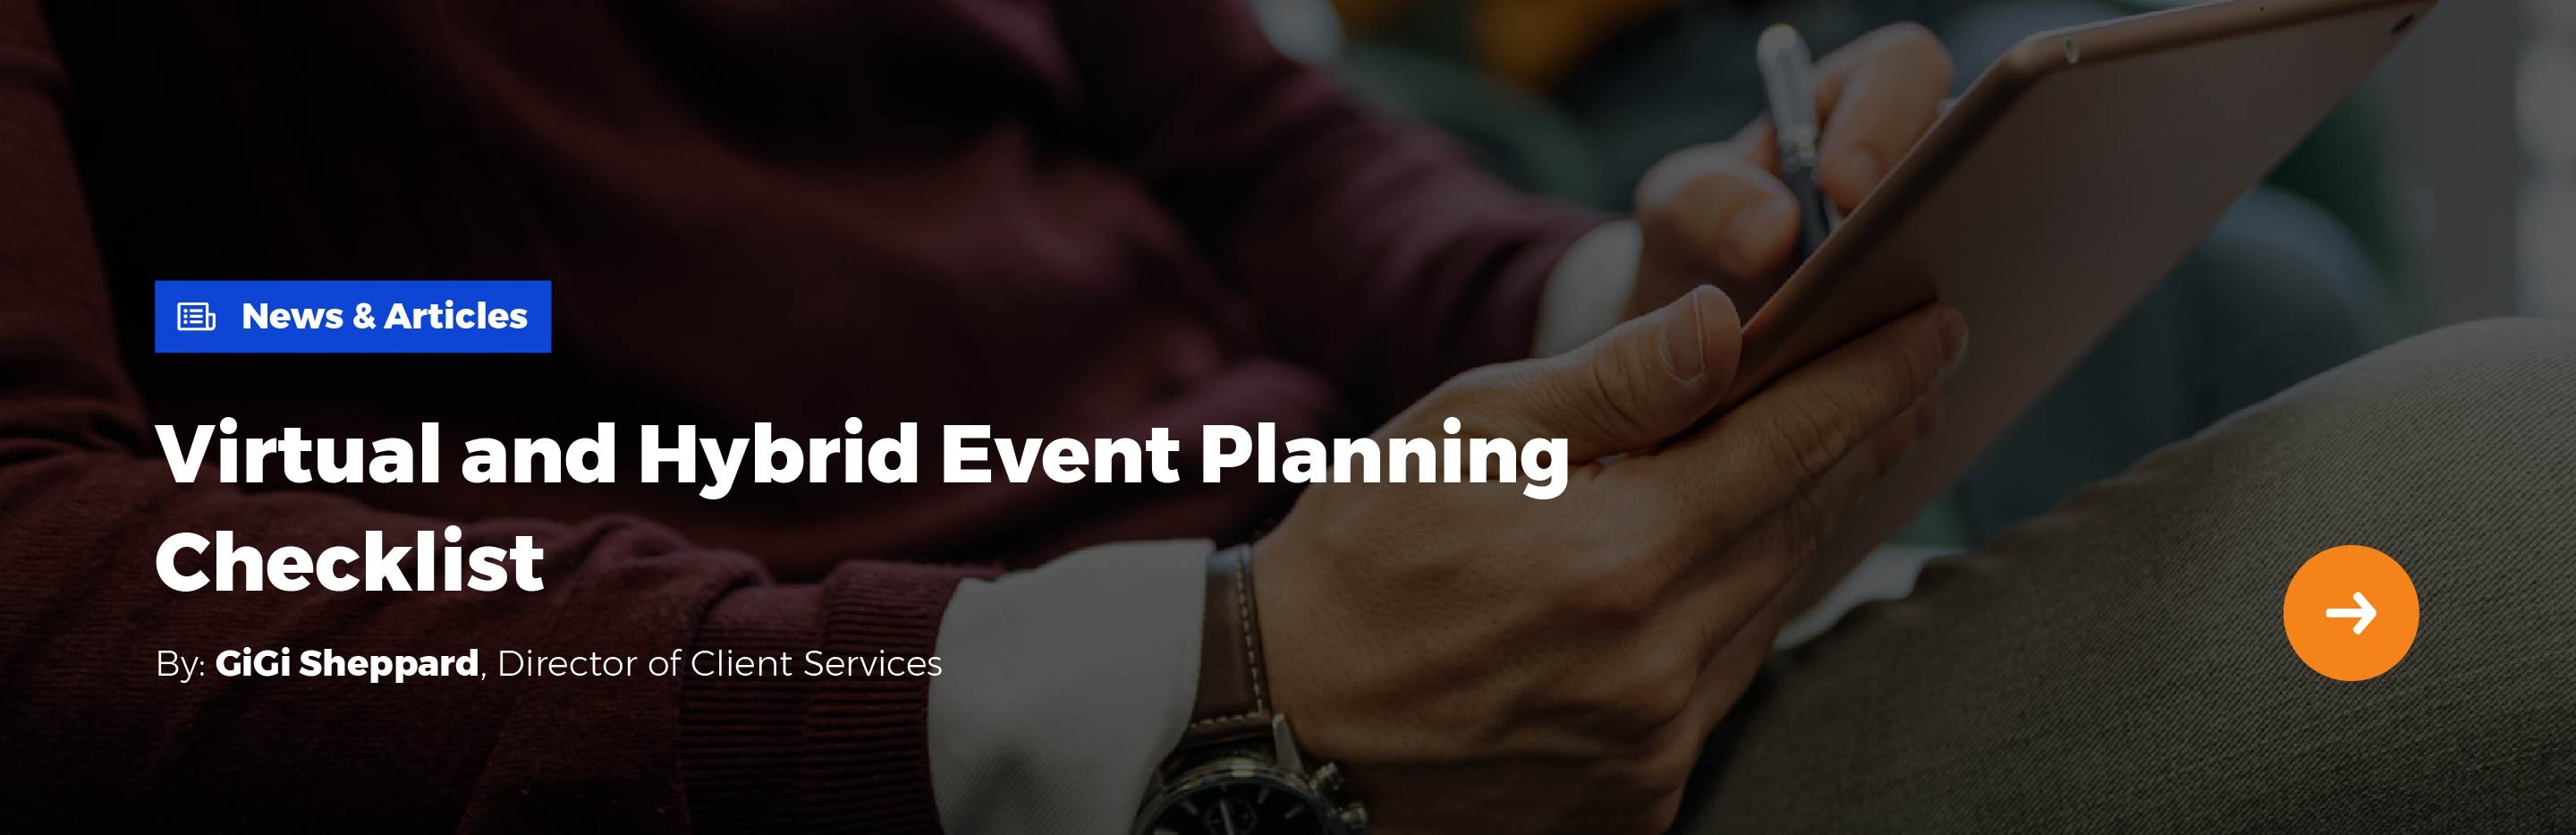 News & Articles: Virtual and Hybrid Event Planning Checklist